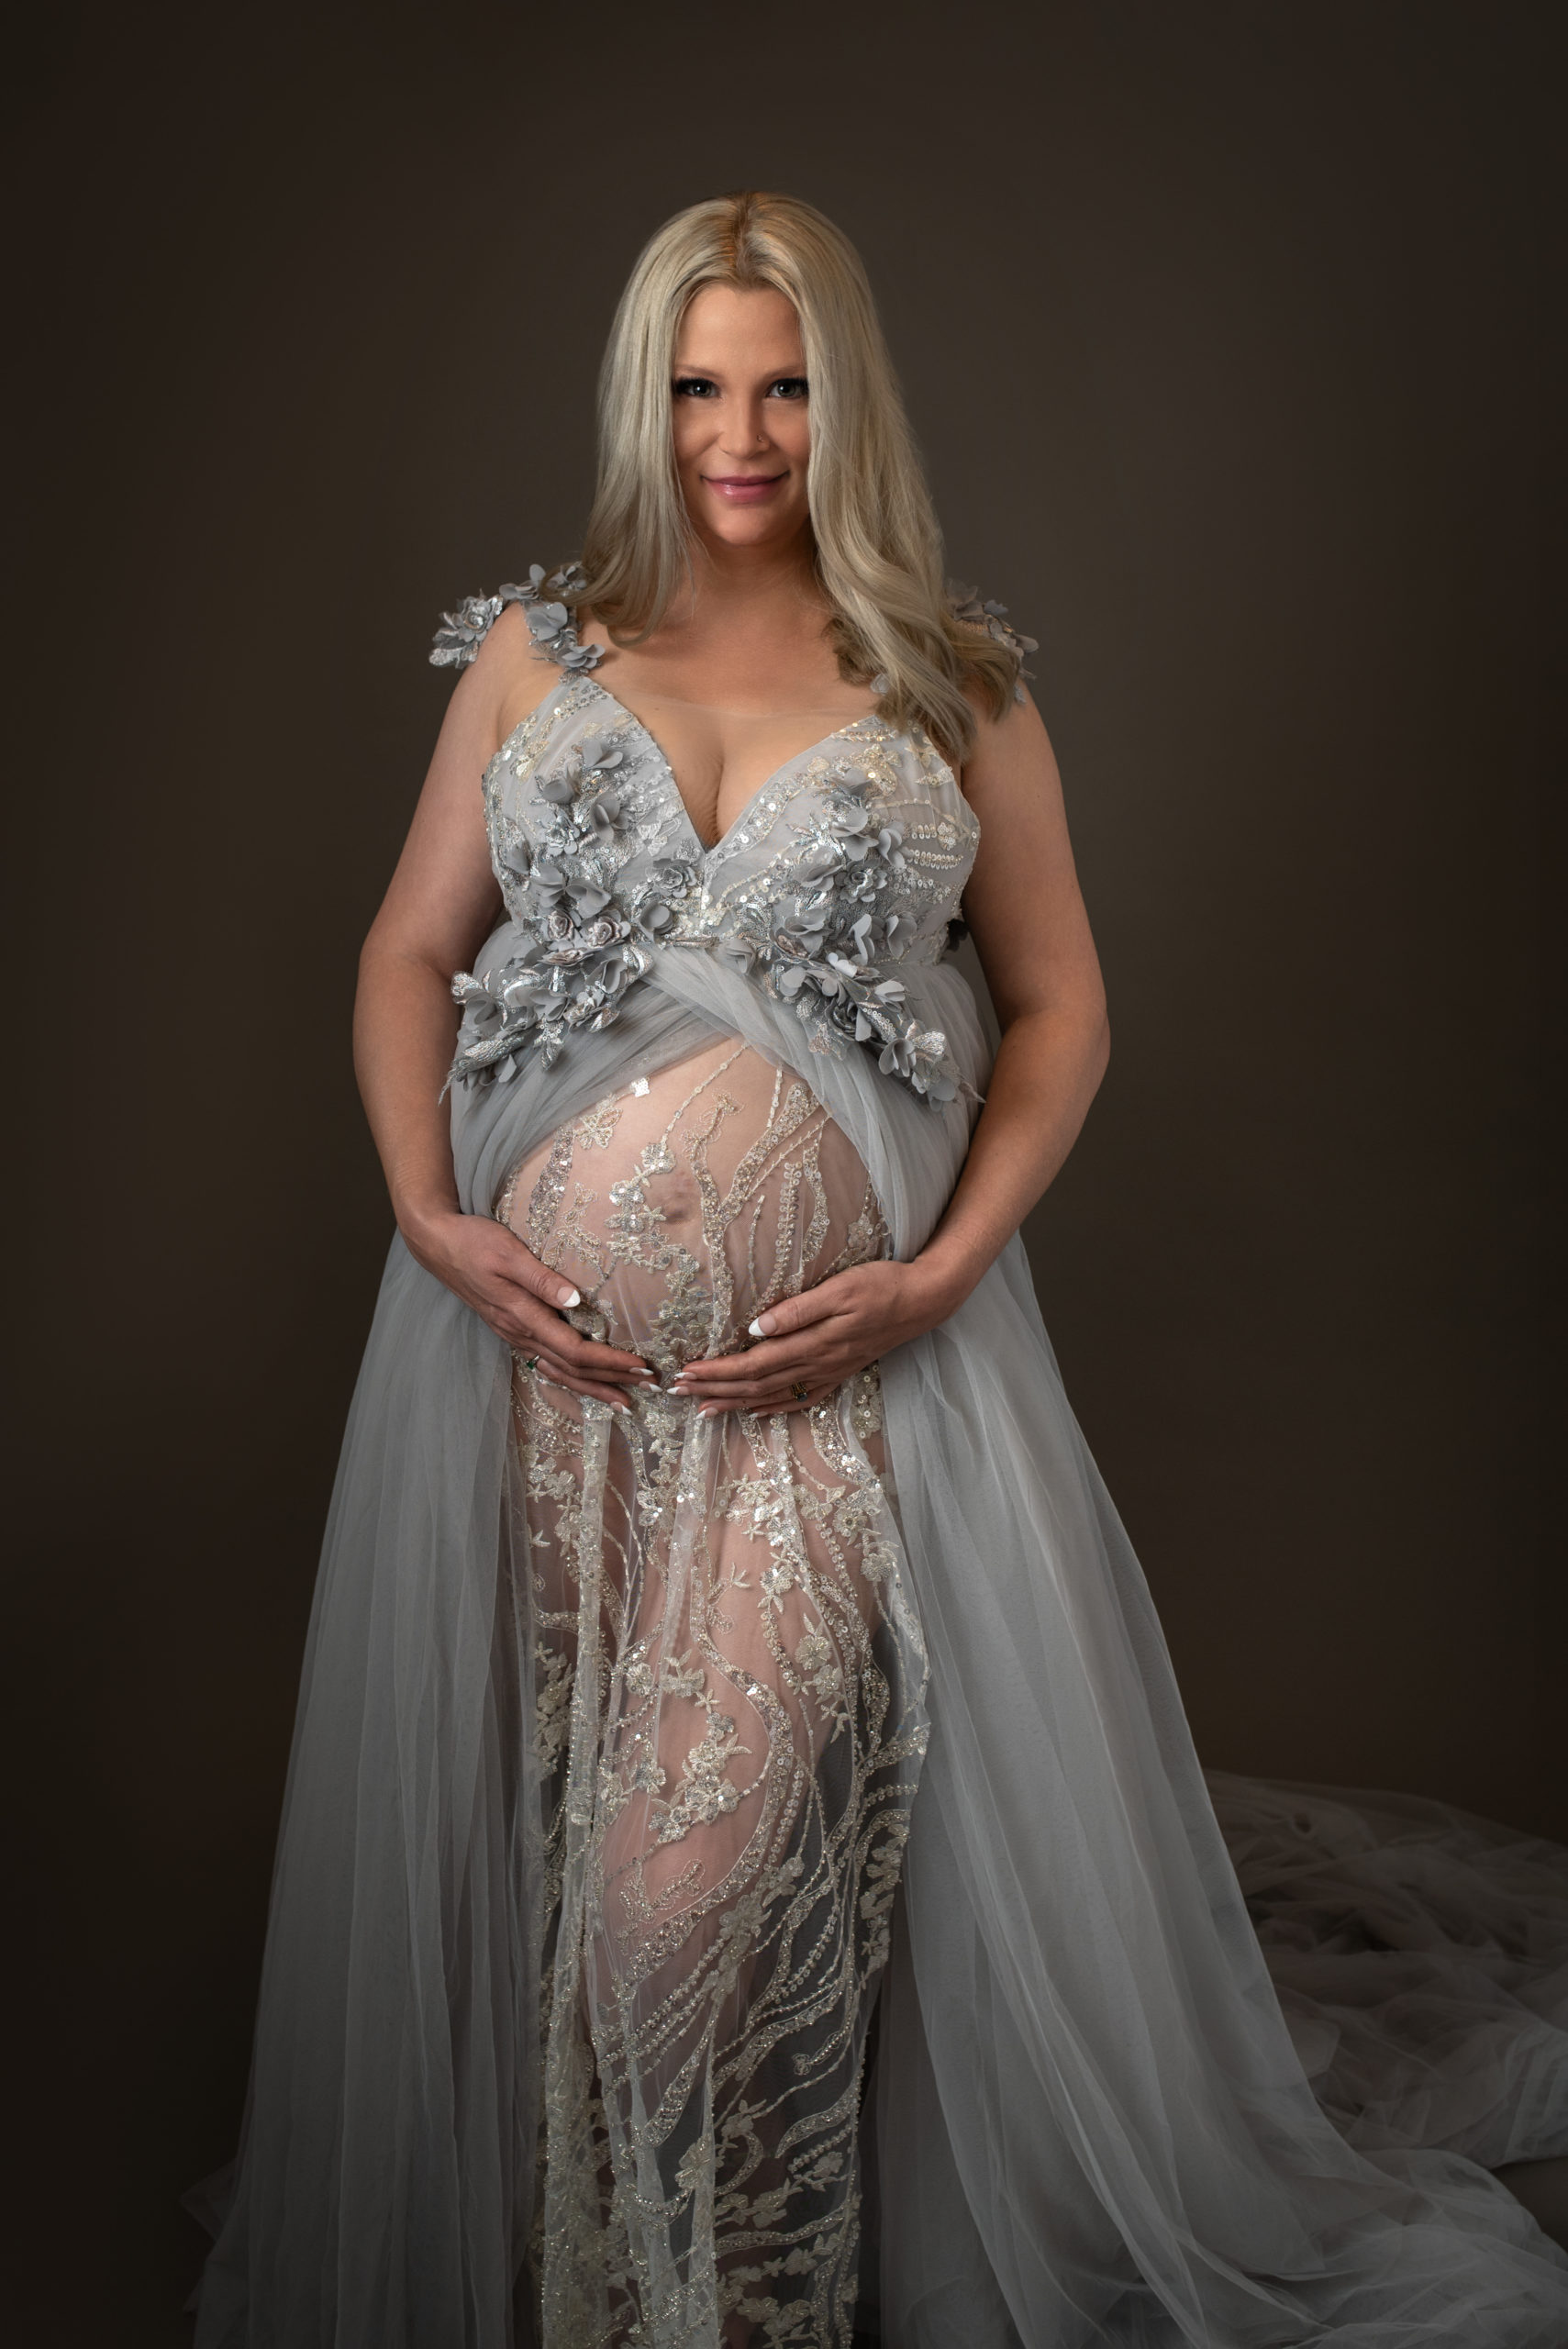 Mom to be in grey maternity gown showing off her bump UTMB Labor and Delivery